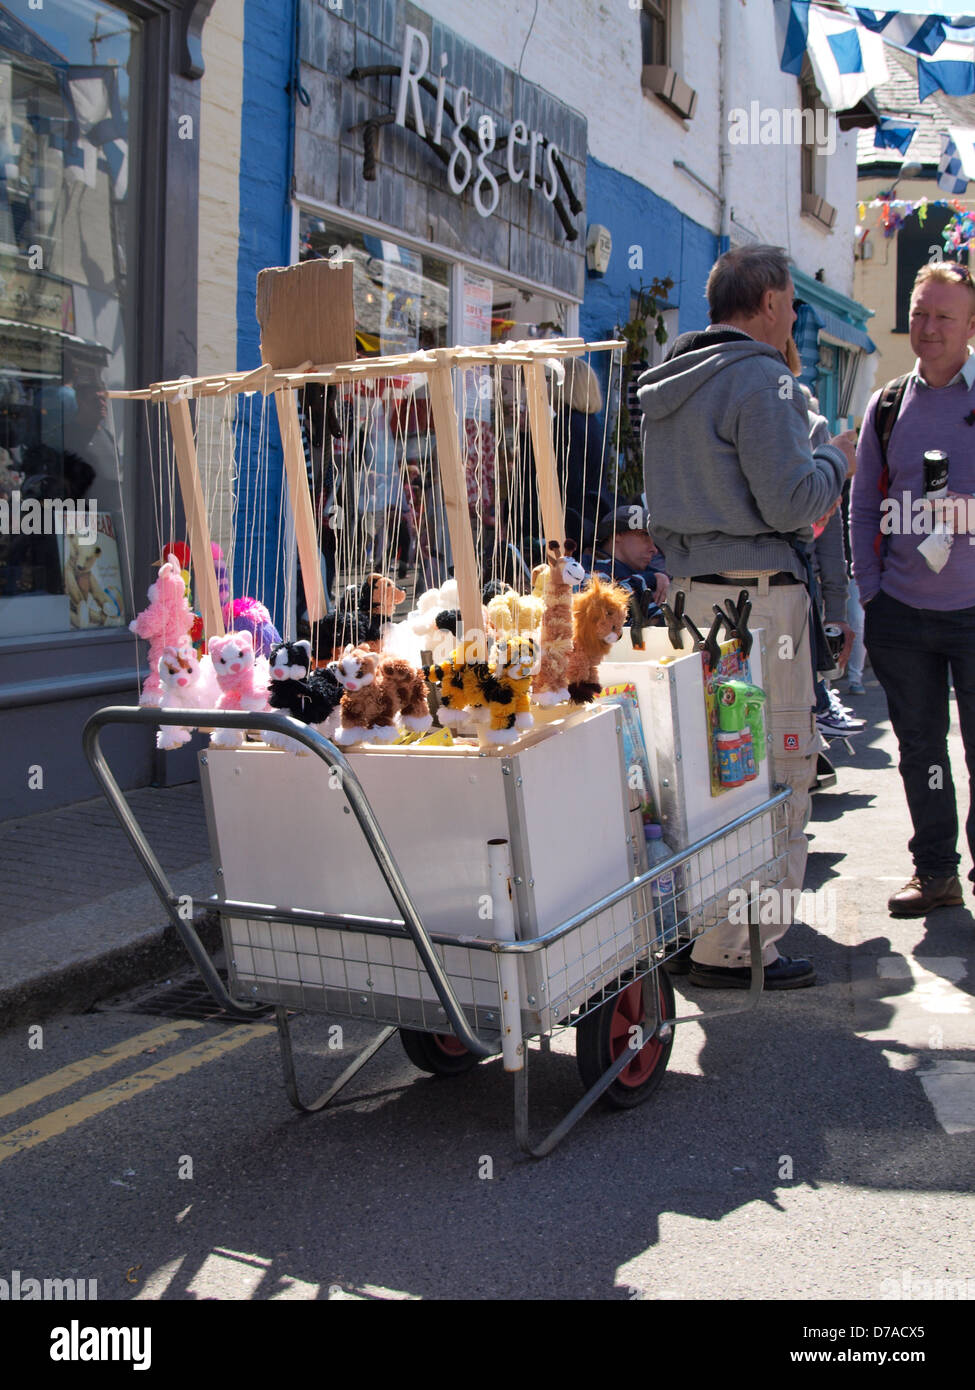 Street vendor selling puppets, Padstow, Cornwall, UK 2013 Stock Photo